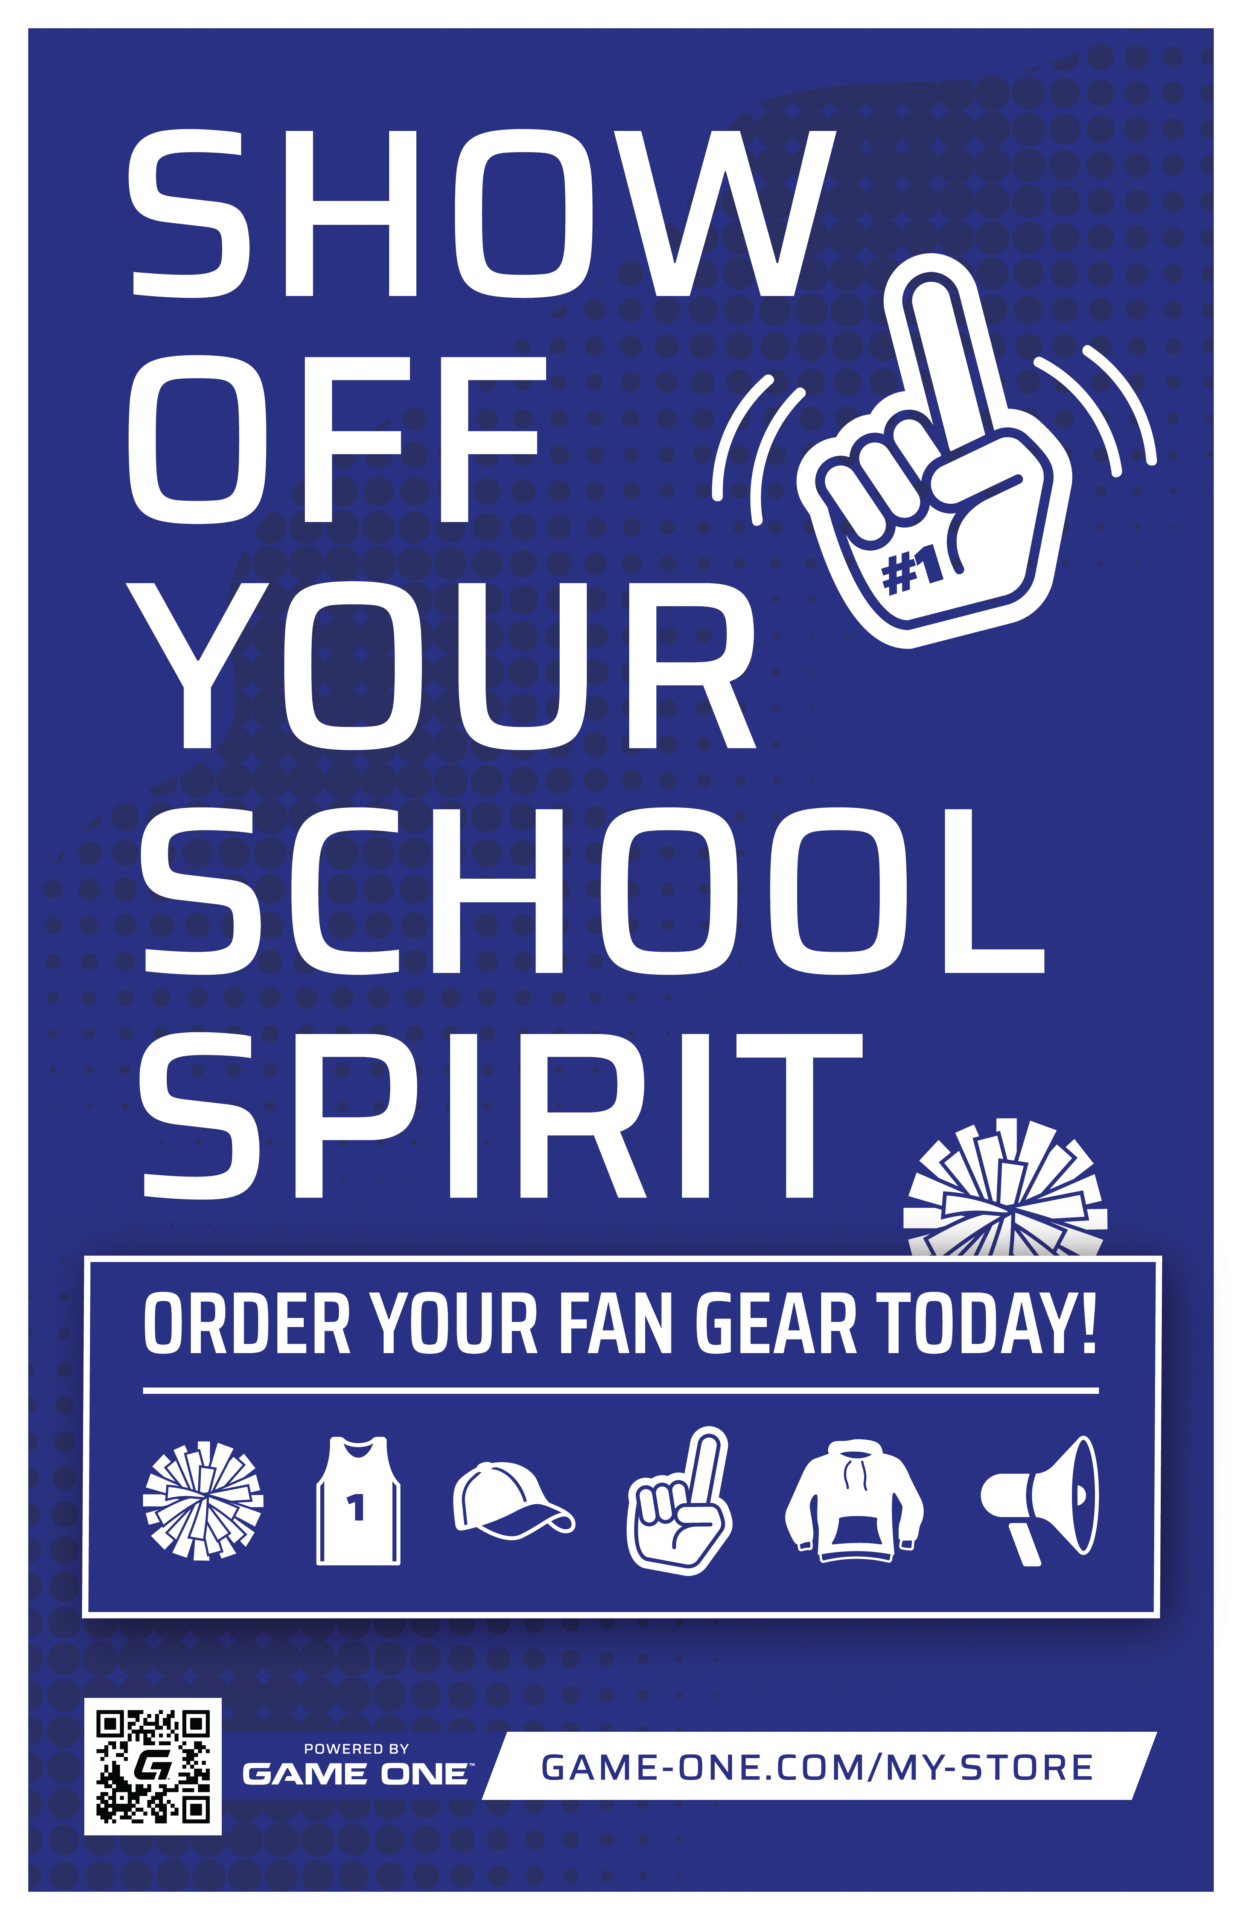 Show Off Your School Spirit - Order Your Fan Gear Today - Powered By Game One